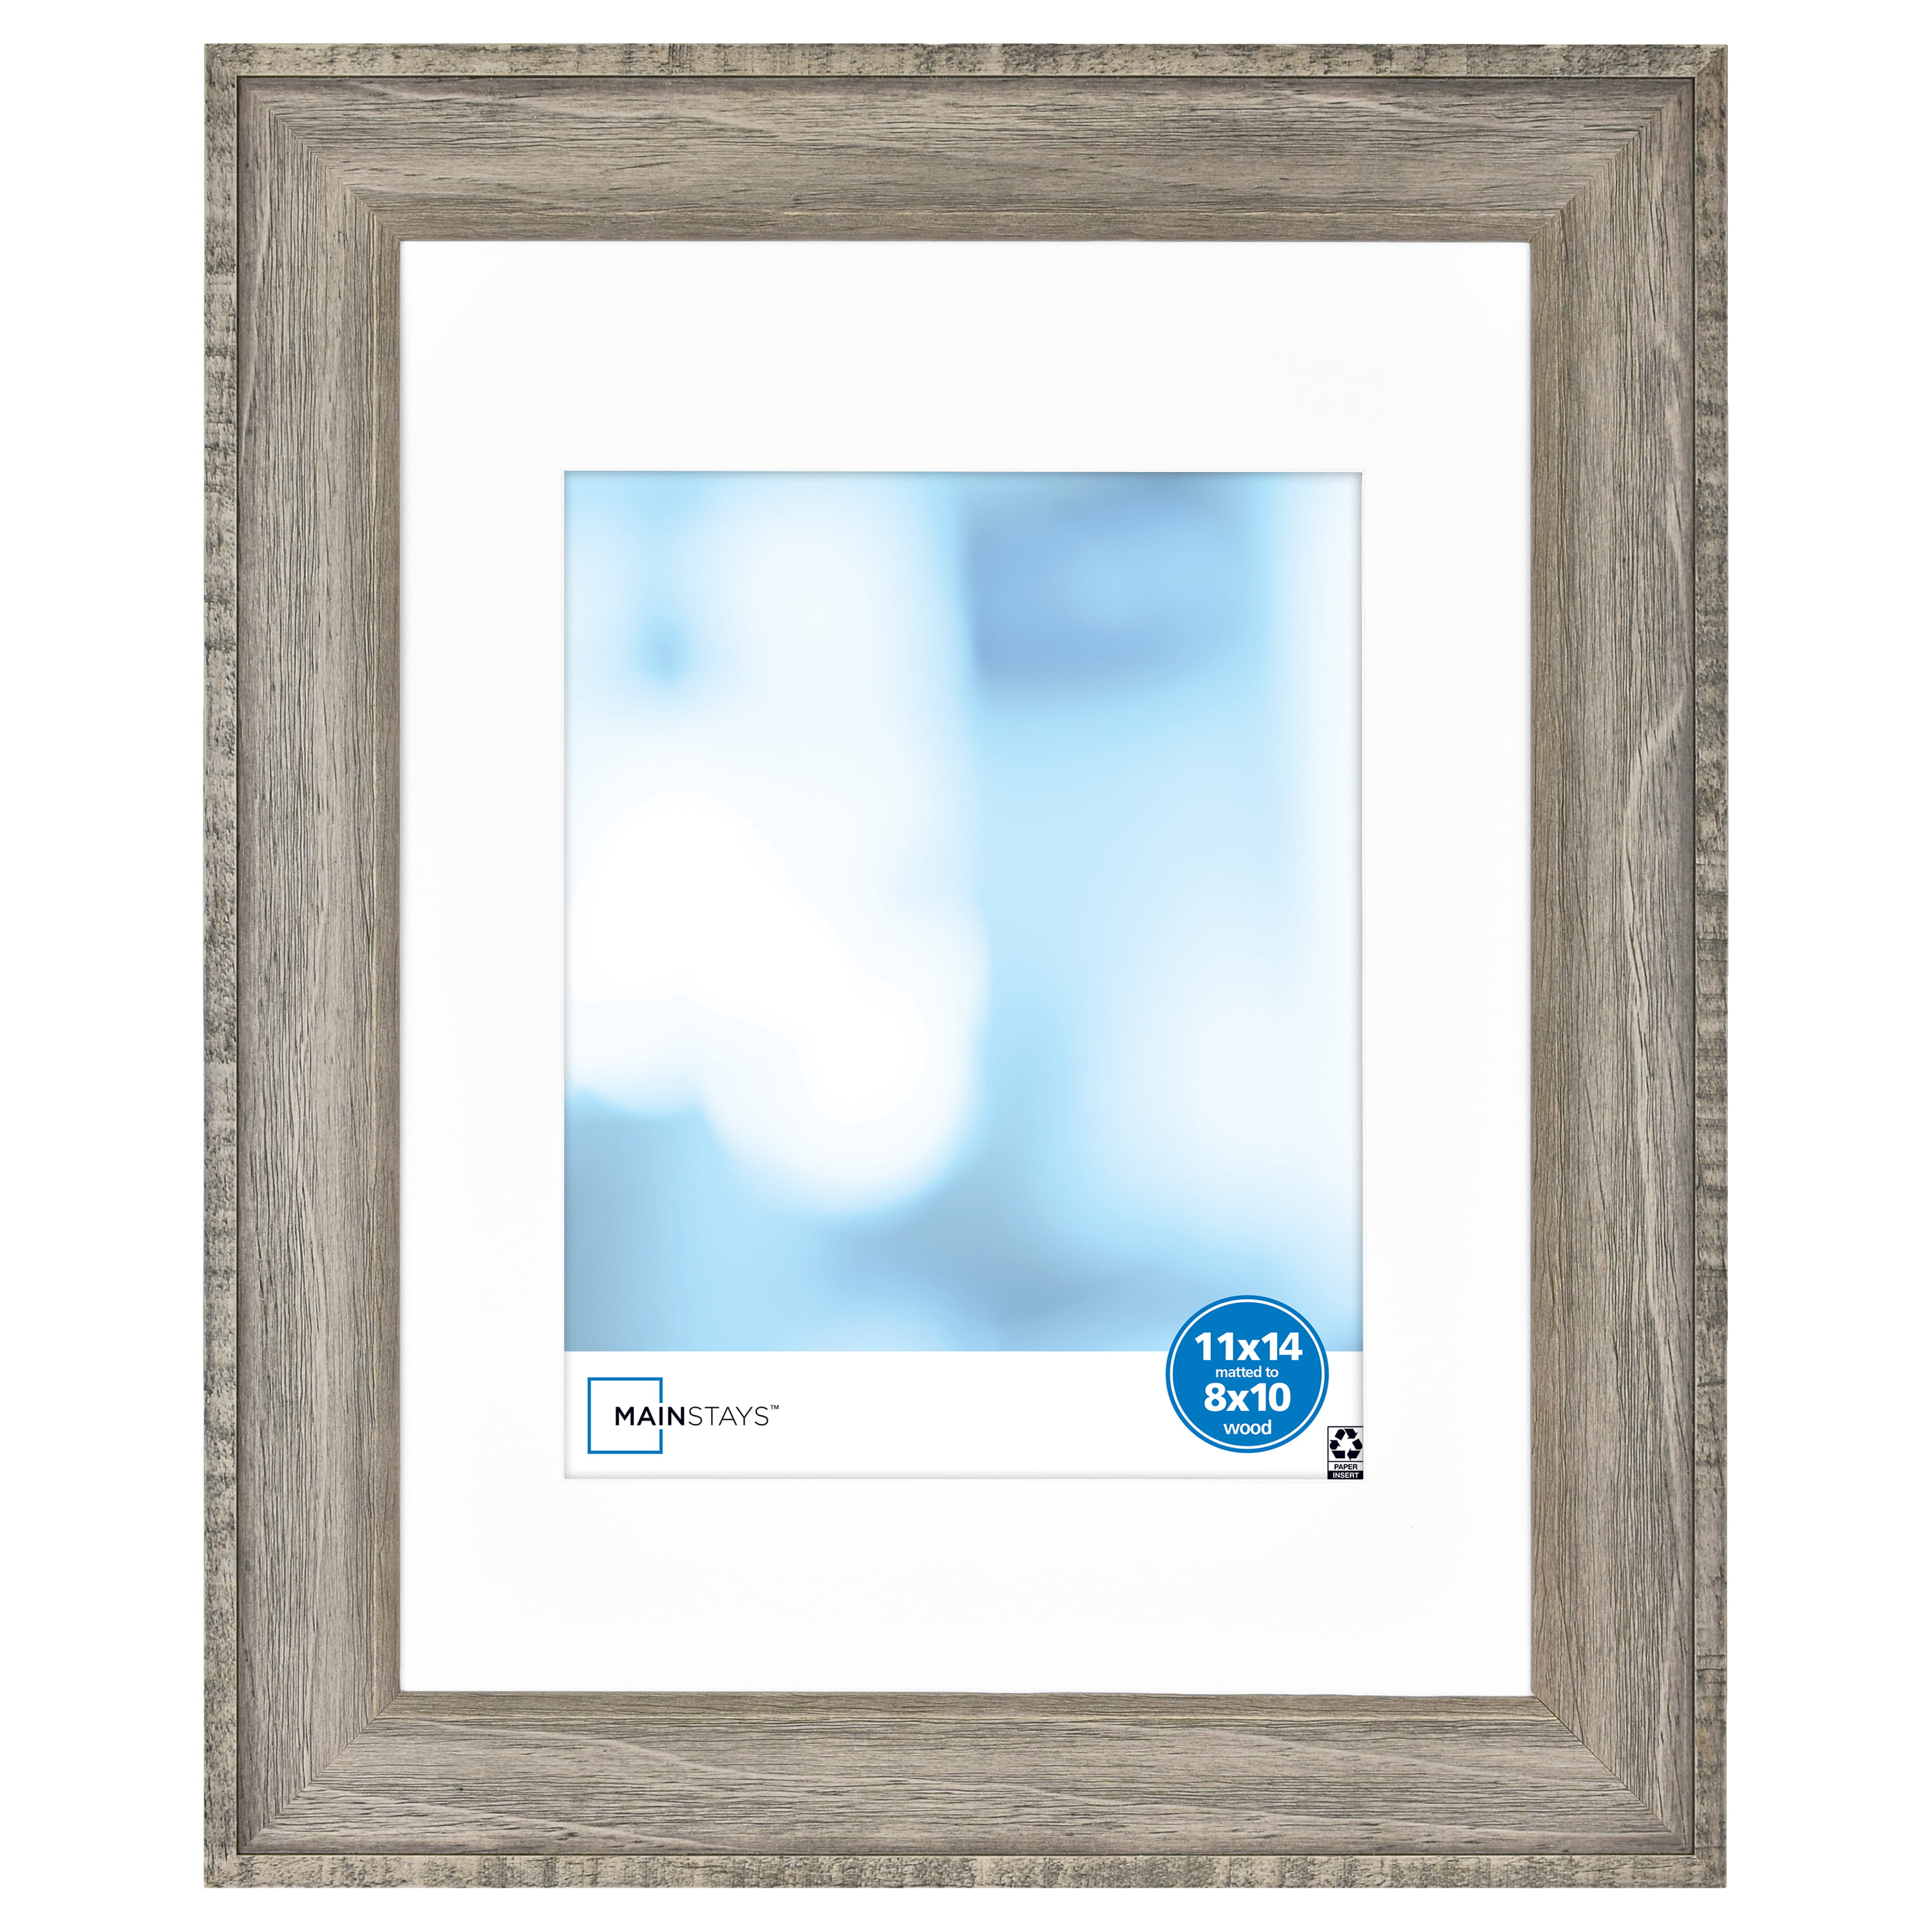 11x14 picture frame white